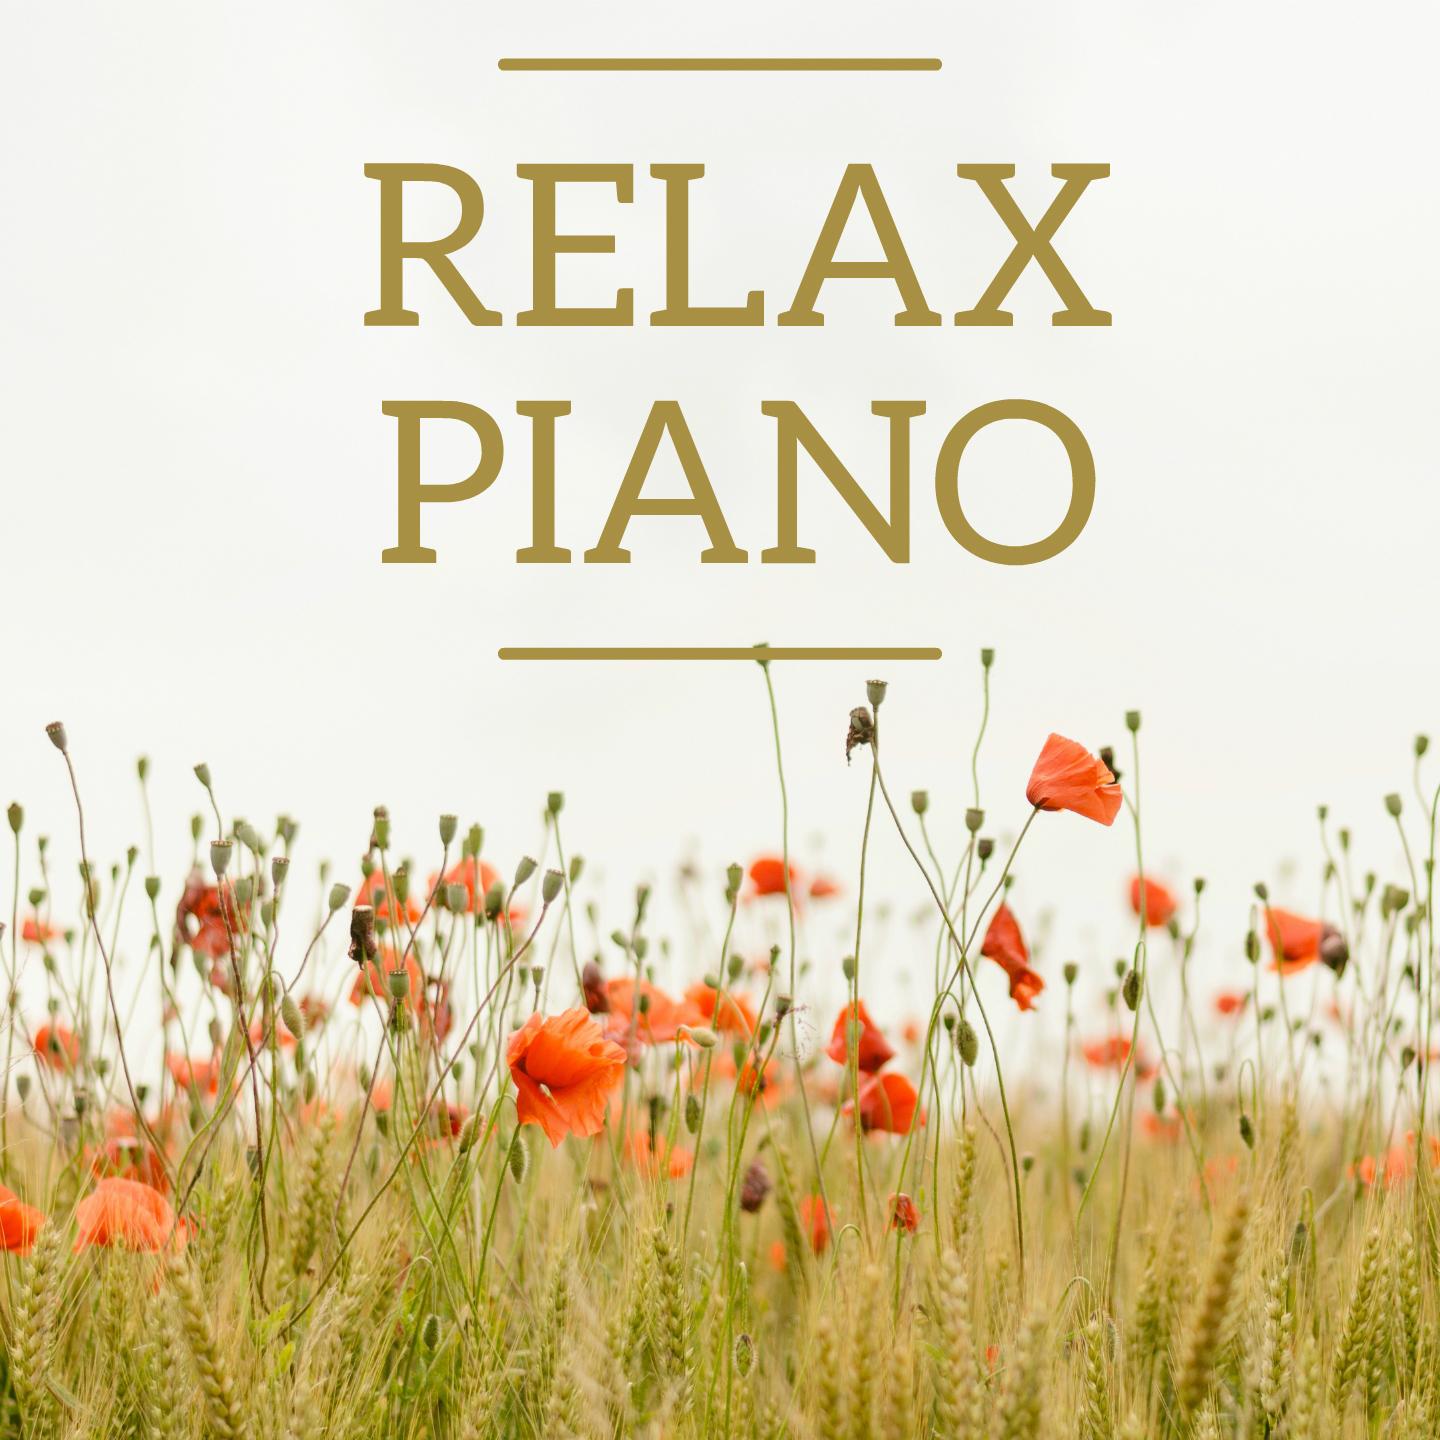 relax piano